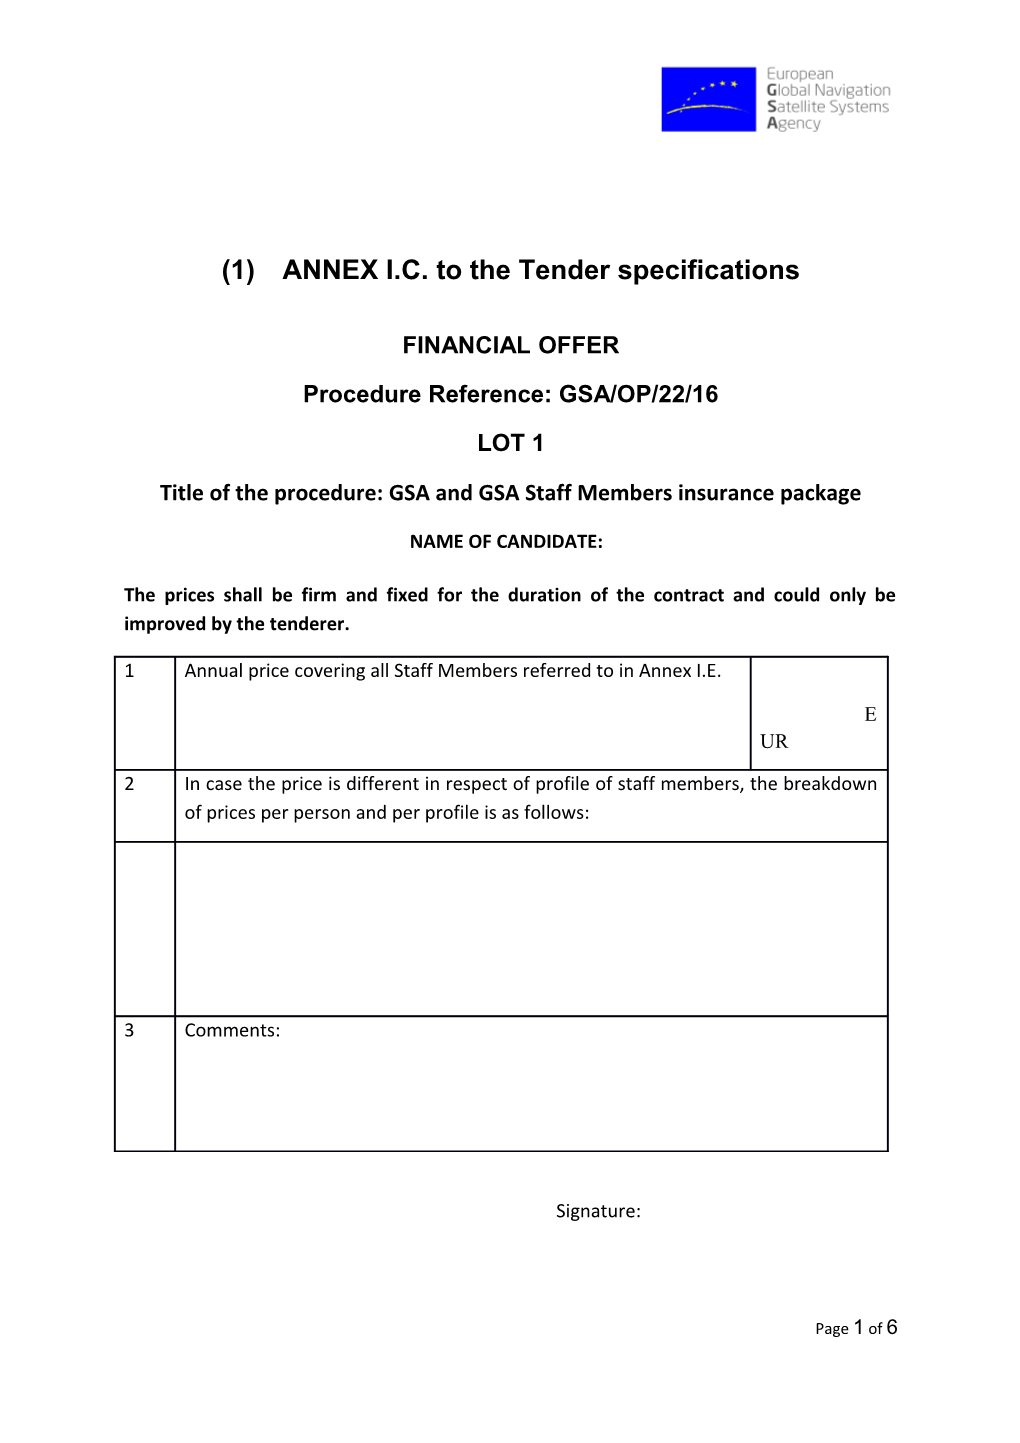 ANNEX I.C.To the Tender Specifications